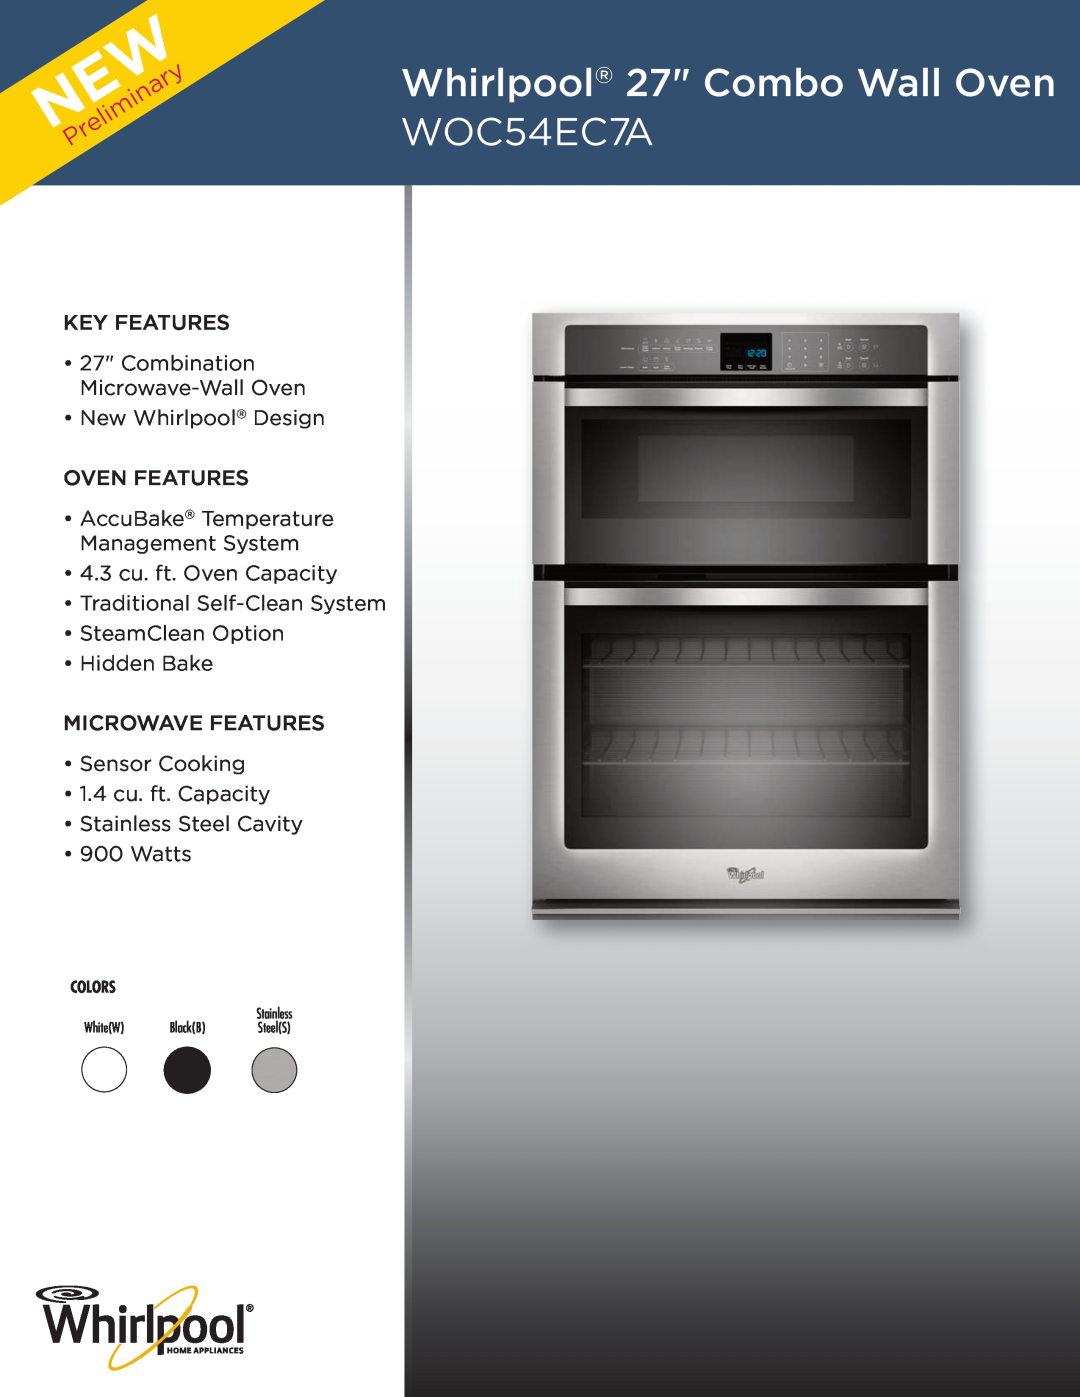 Whirlpool WOS51EC0A manual Whirlpool 27 Combo Wall Oven WOC54EC7A, 4.3 cu. ft. Oven Capacity Traditional Self-Clean System 